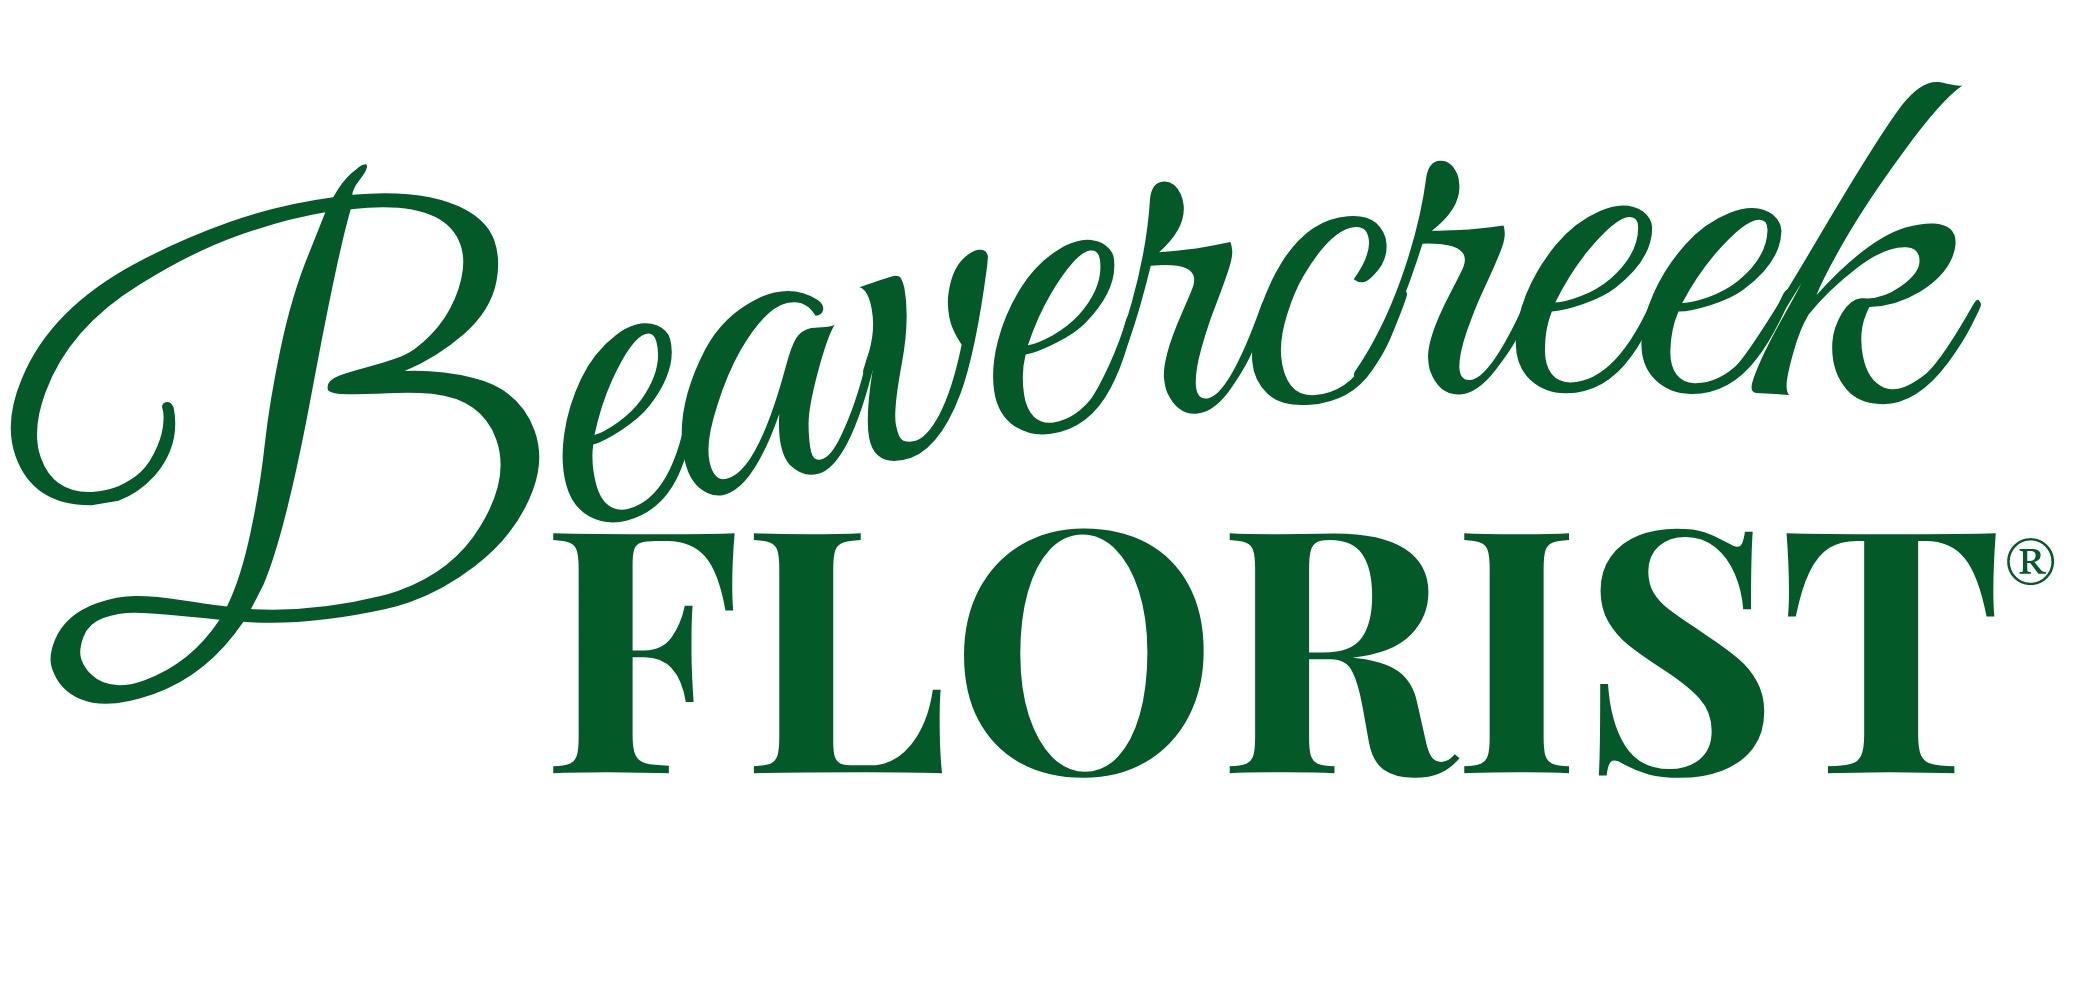 Beavercreek Florist is your online Ohio flower shop delivering fresh flowers and gifts to all of Beavercreek, OH.